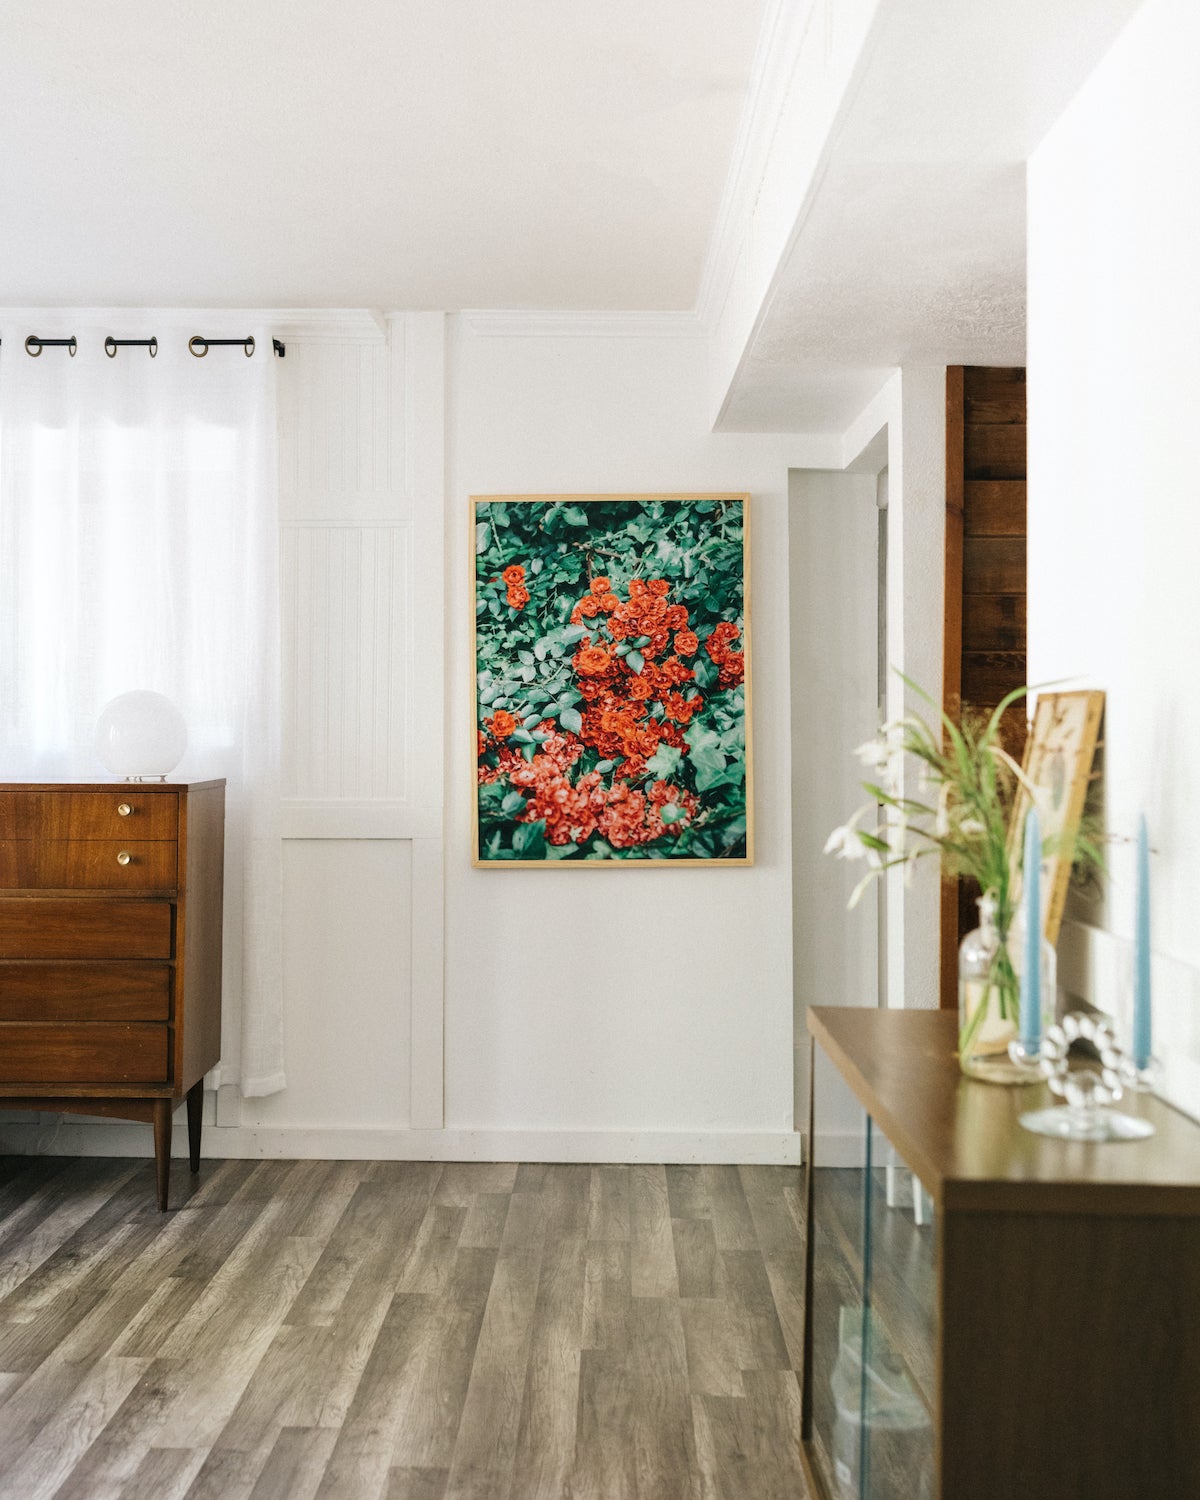 Photo by Kelly Kang of large framed photo featuring red flowers in minimalist roomscape